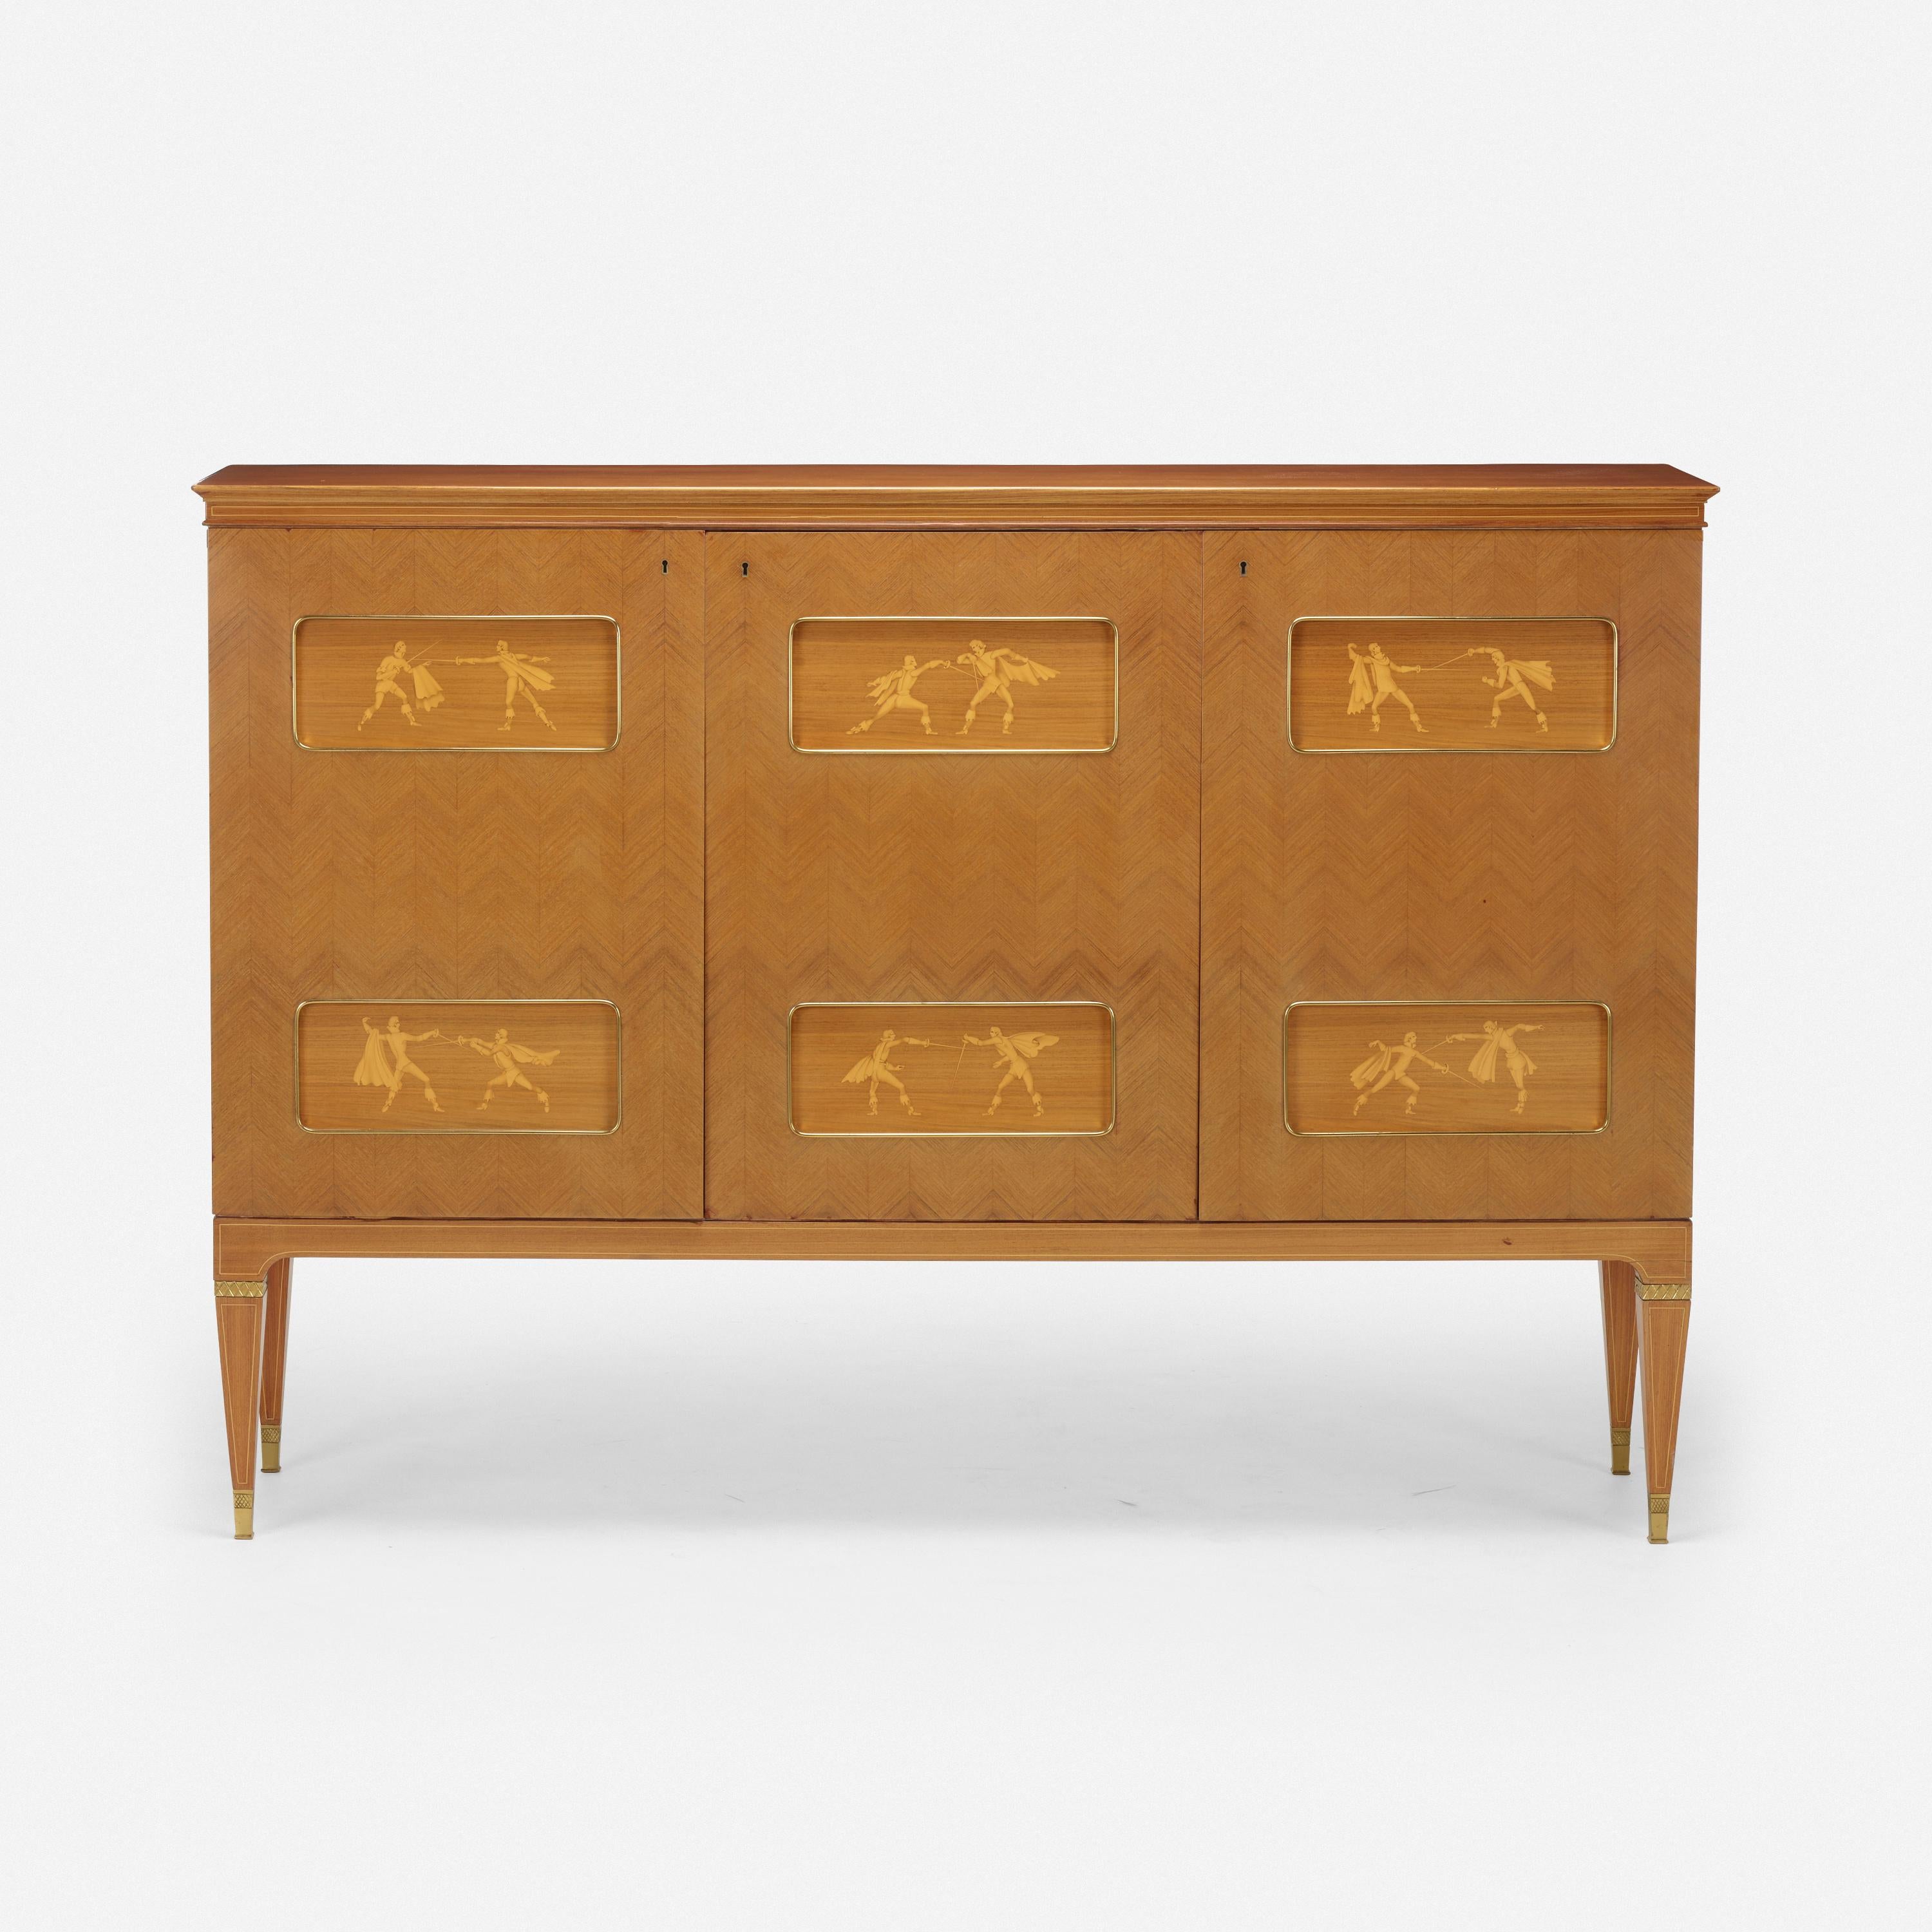 Mahogany and Sycomore Bar Cabinet by Paolo Buffa decorated with fencing scenes. Interior fitted with four movable shelves Italy: circa 1950 Provenance: Blackman Cruz, Los Angeles Private Collection.